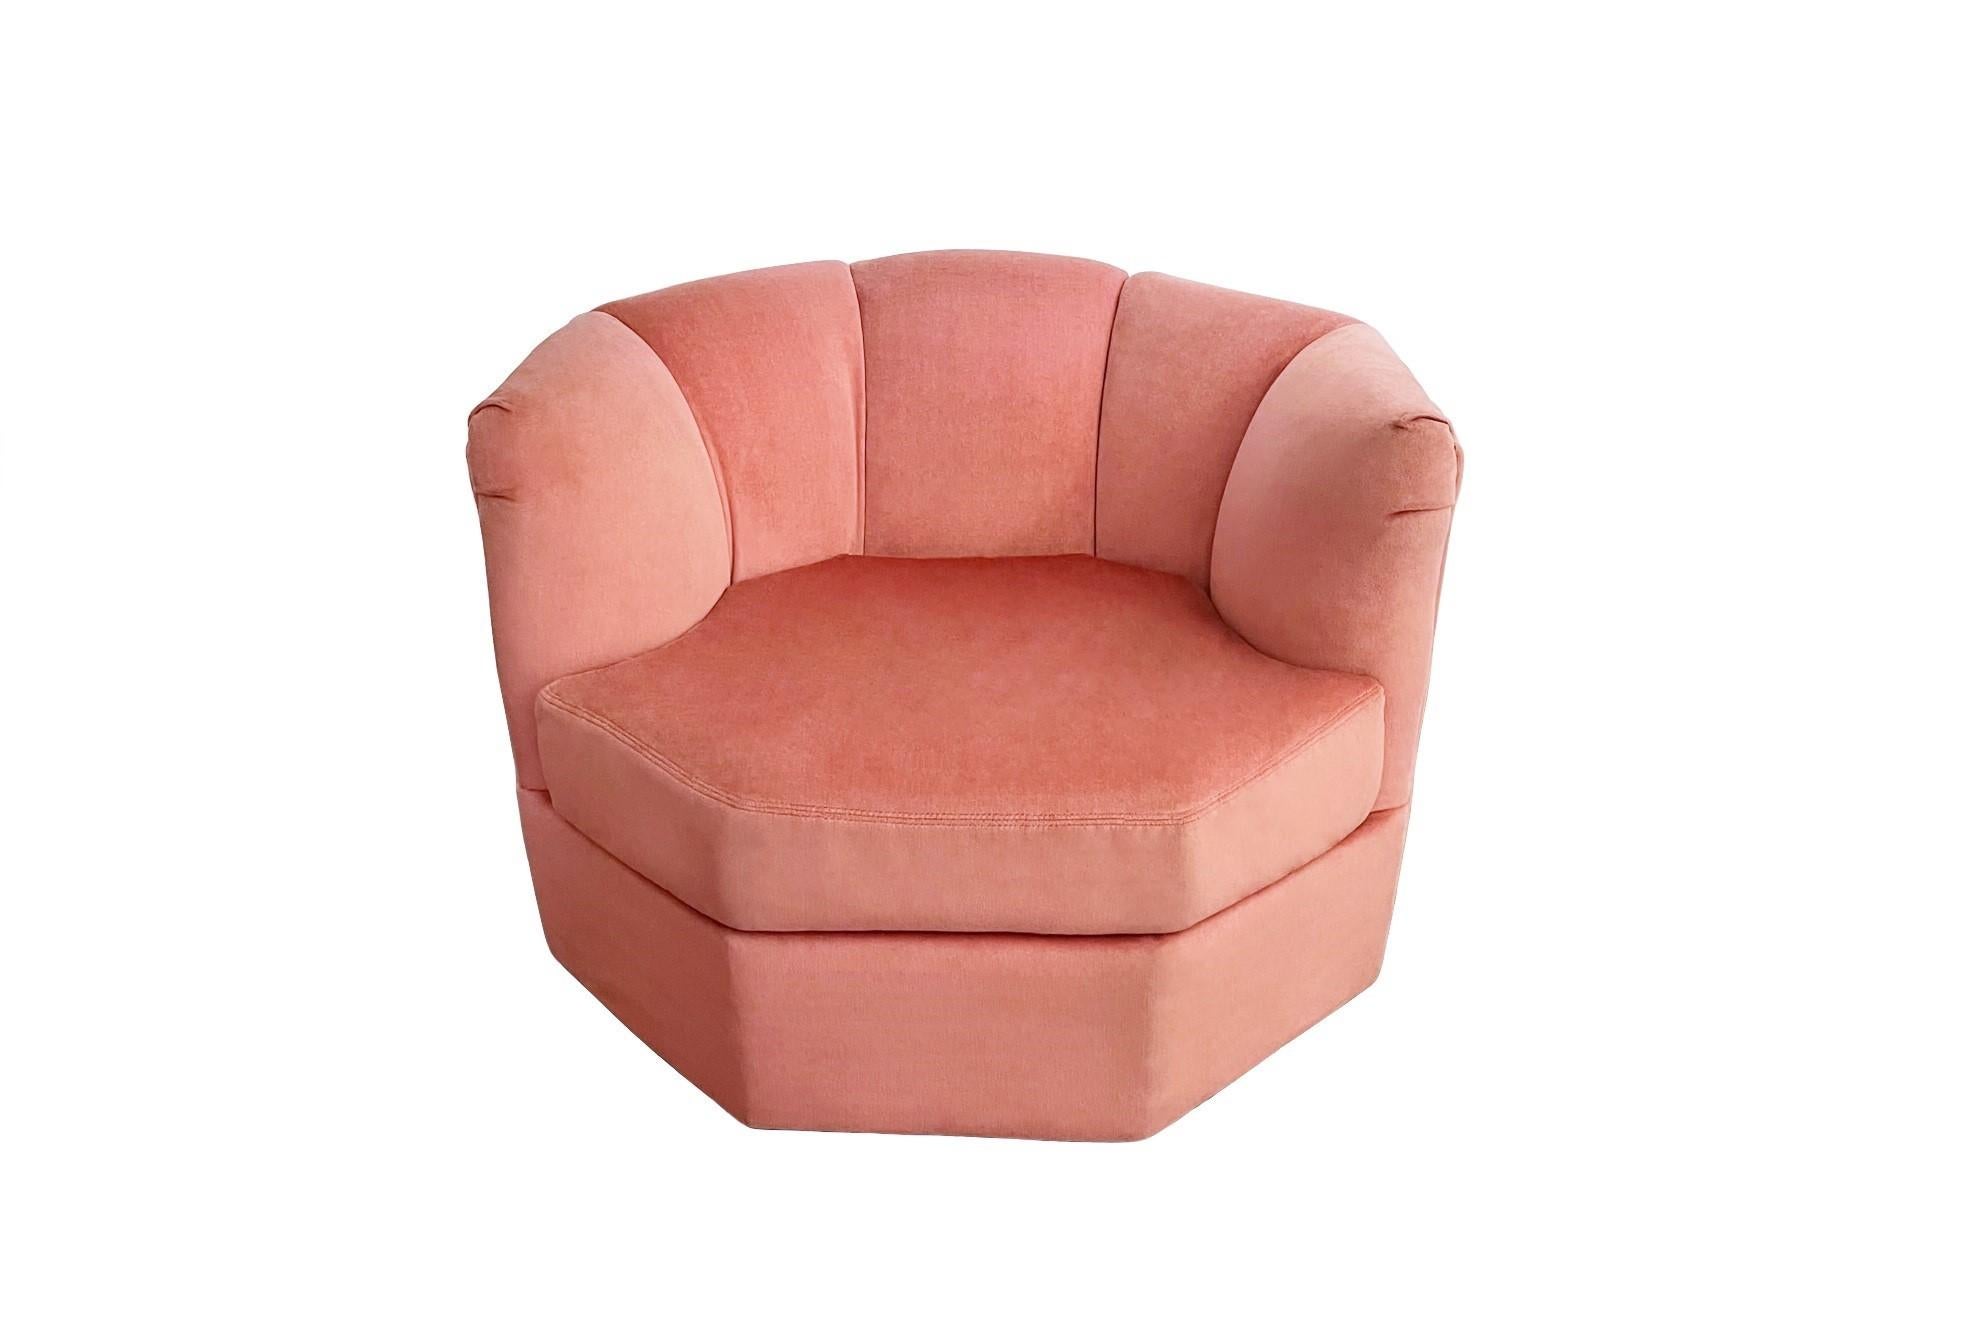 1970s Hexagonal Club Chairs in a Dusty Rose Velvet In Excellent Condition For Sale In Dallas, TX